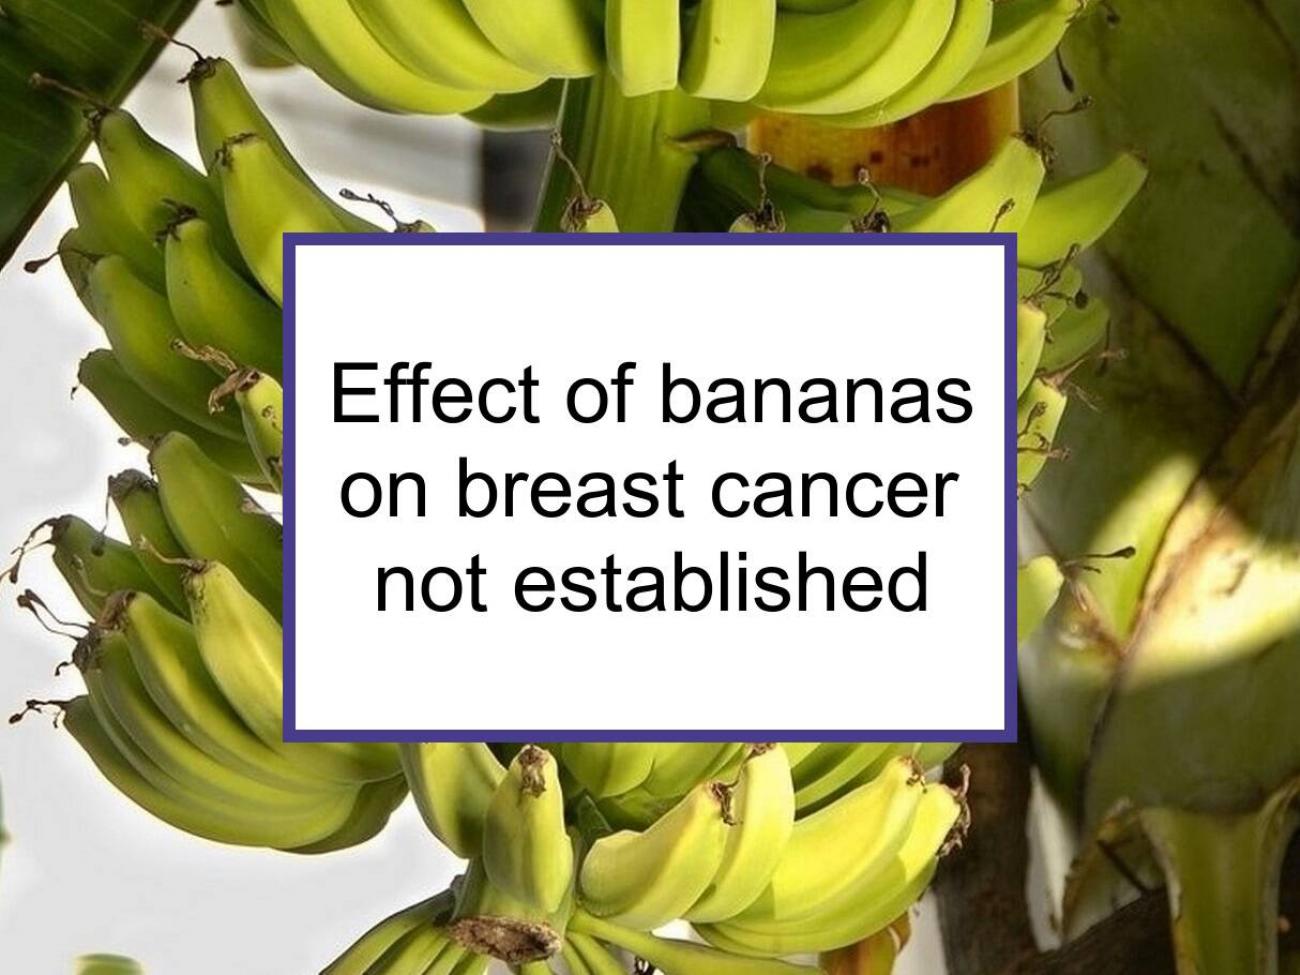 Studies Have Not Established The Effect Of Bananas On Breast Cancer